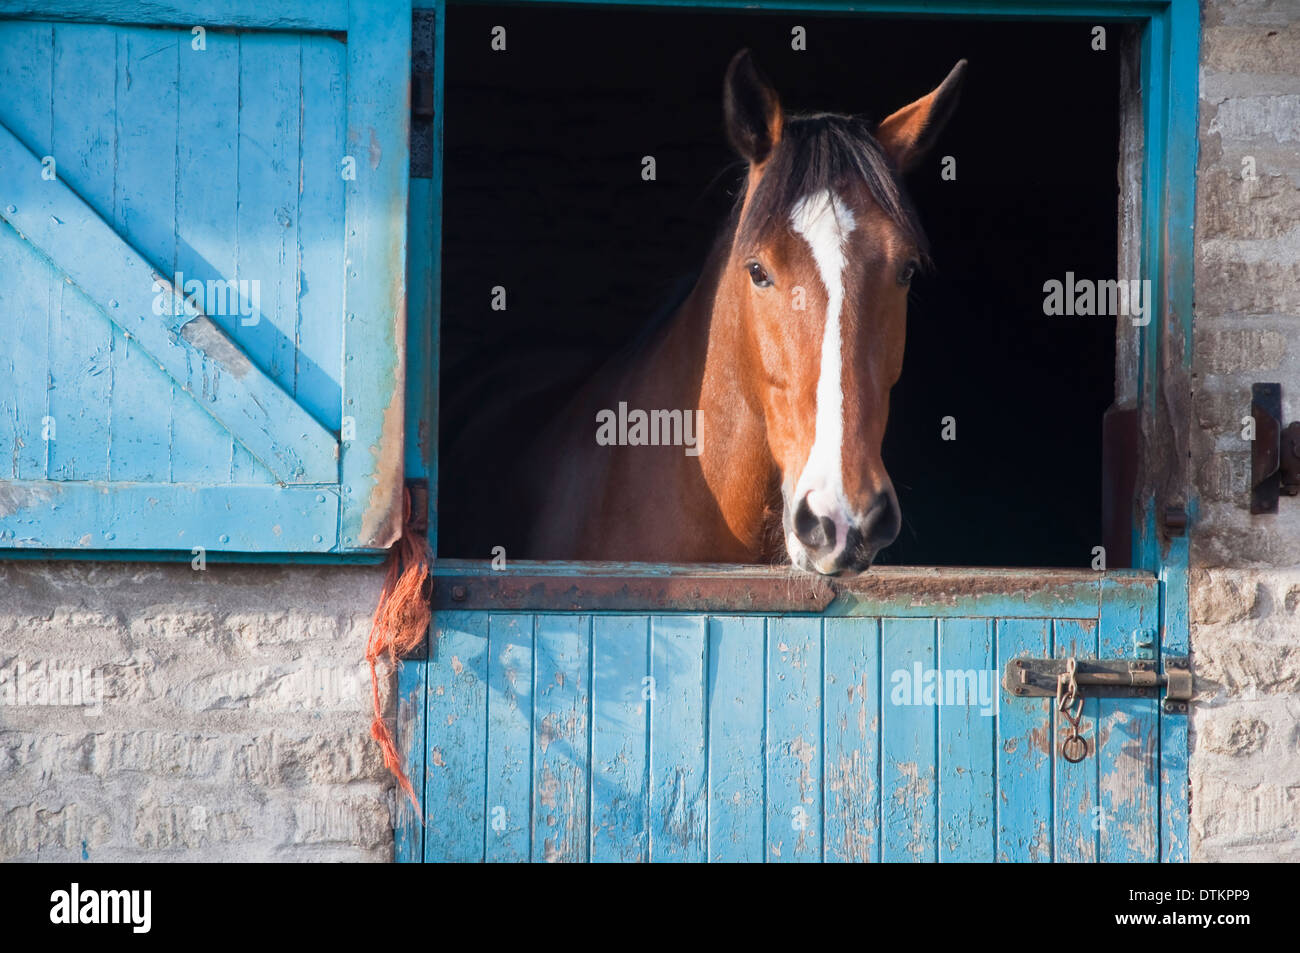 A fine chestnut horse with a white stripe / blaze looking out of a stable door. UK. Stock Photo